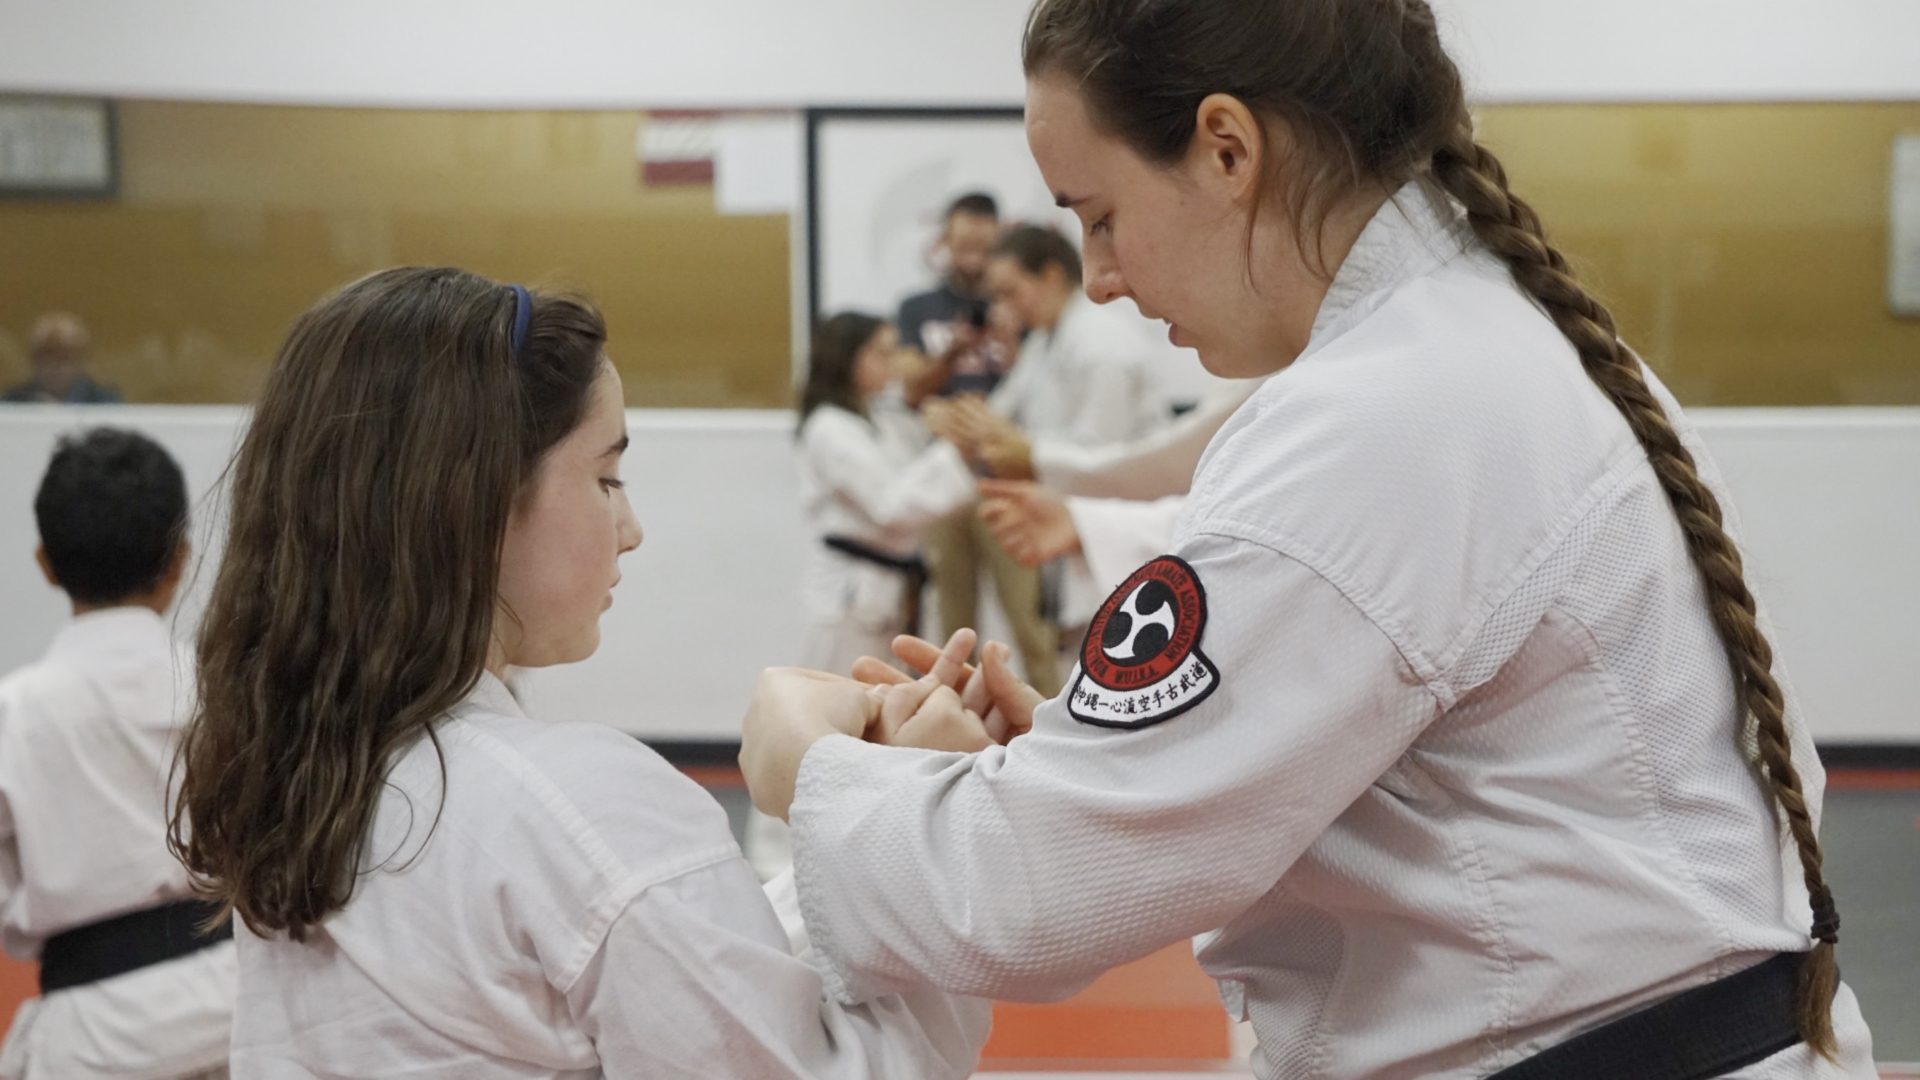 Teen sensei helps a female student with hand position during kata.